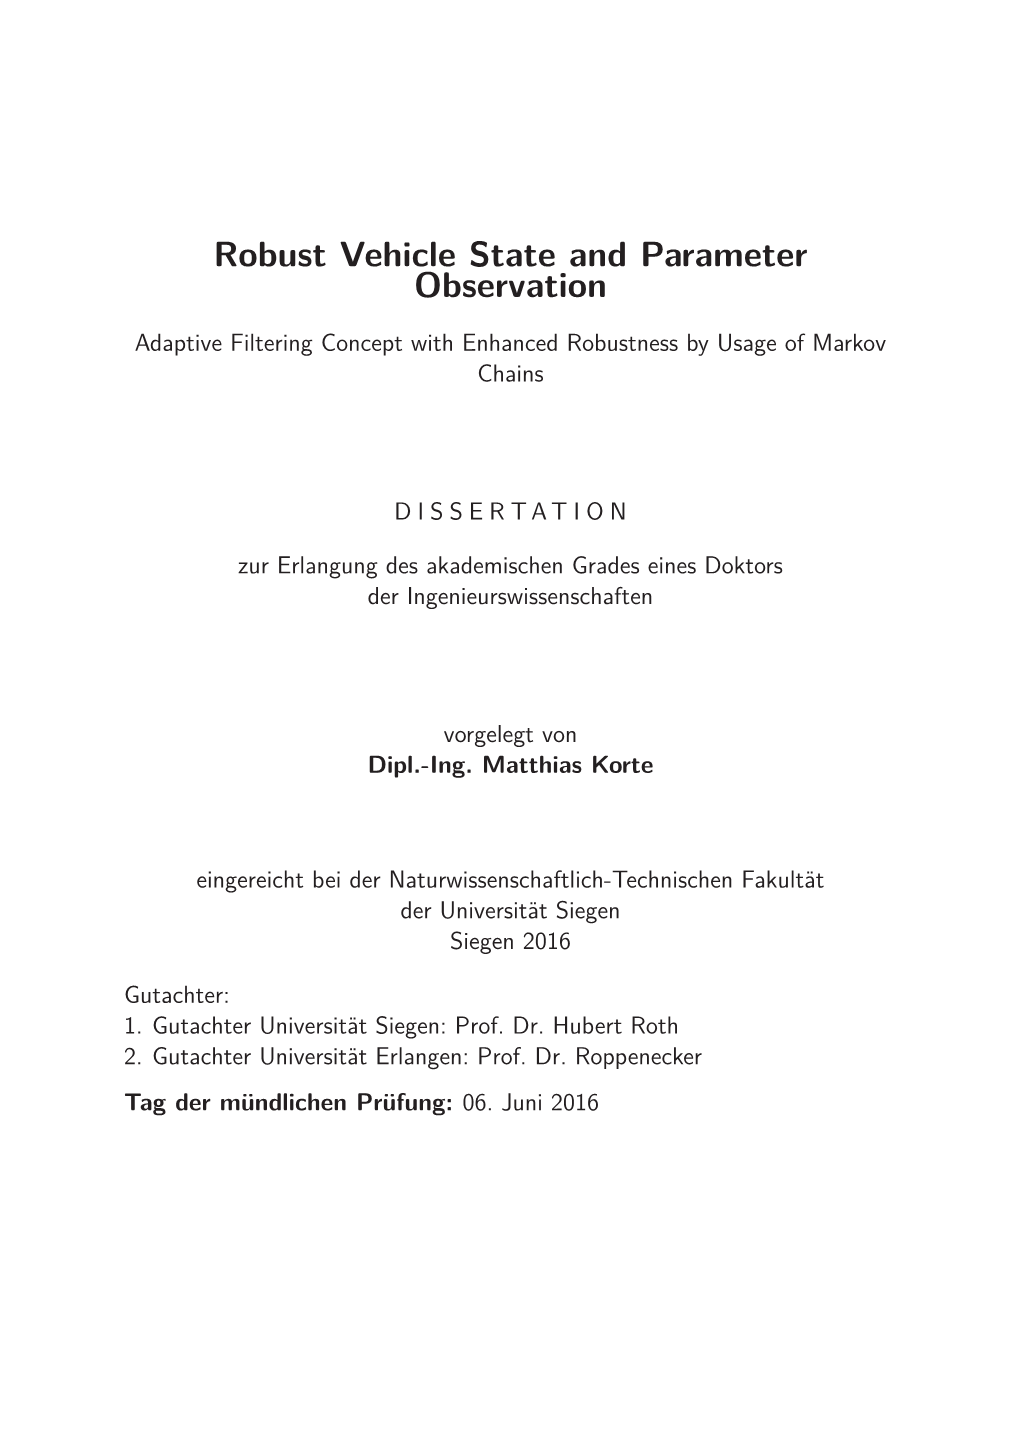 Robust Vehicle State and Parameter Observation